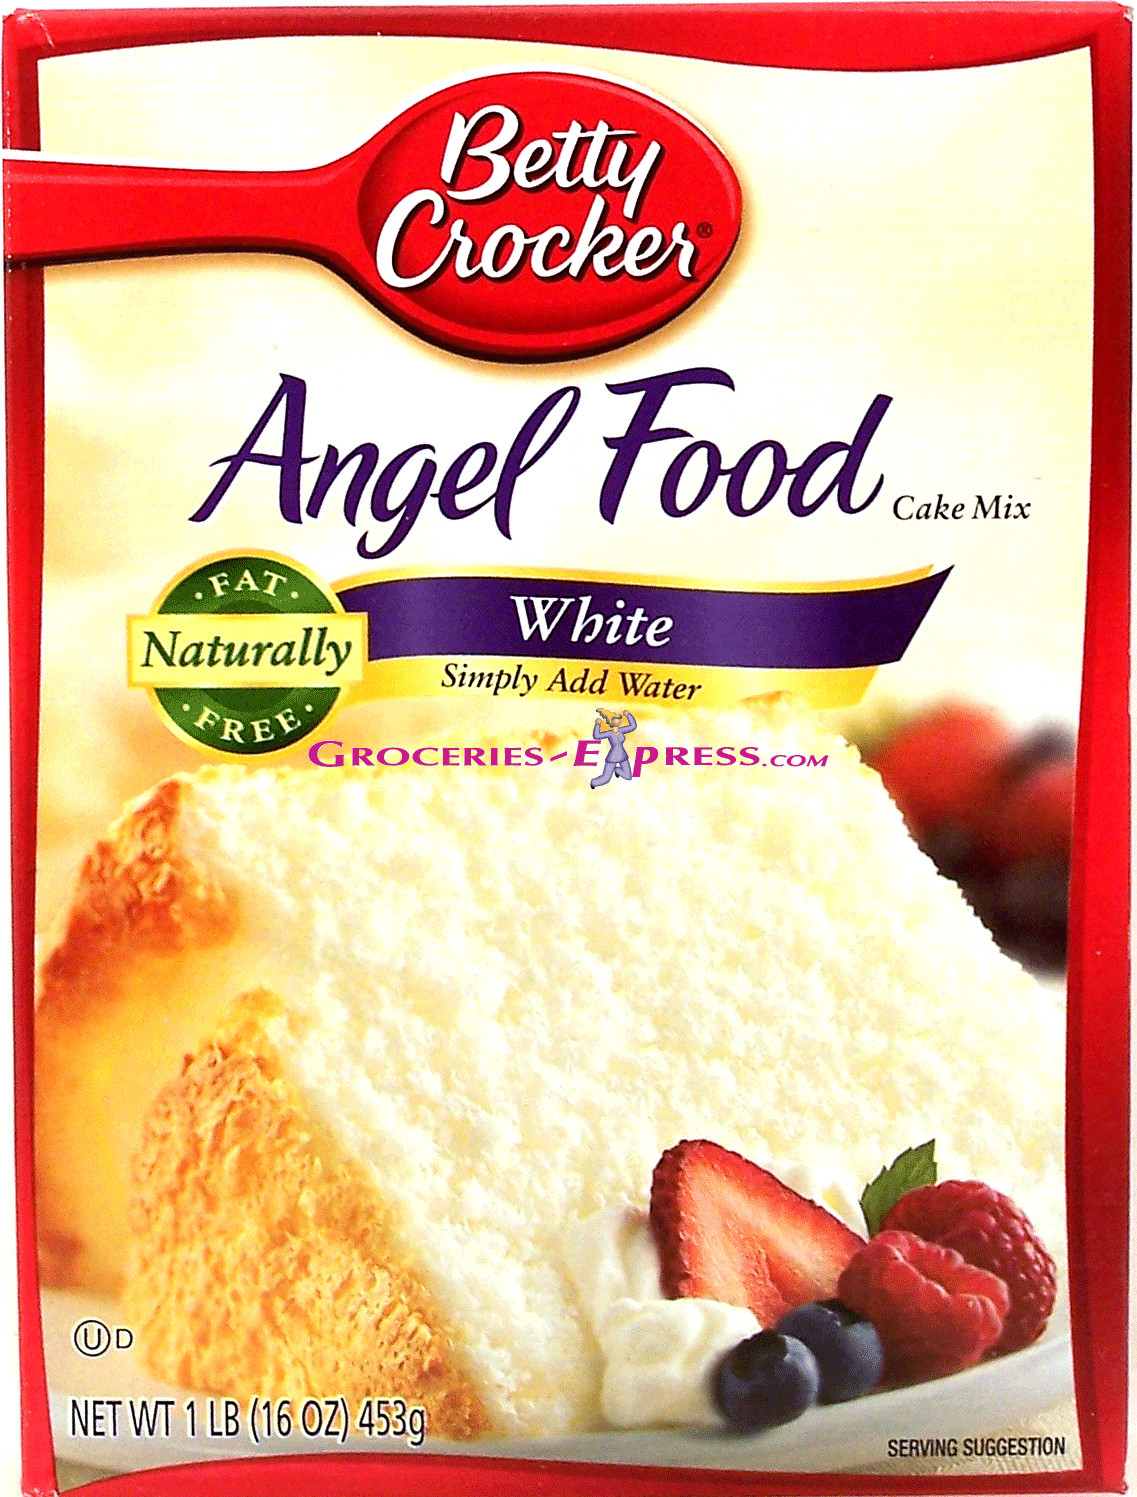 Gluten Free Angel Food Cake Mix
 Groceries Express Product Infomation for Betty Crocker